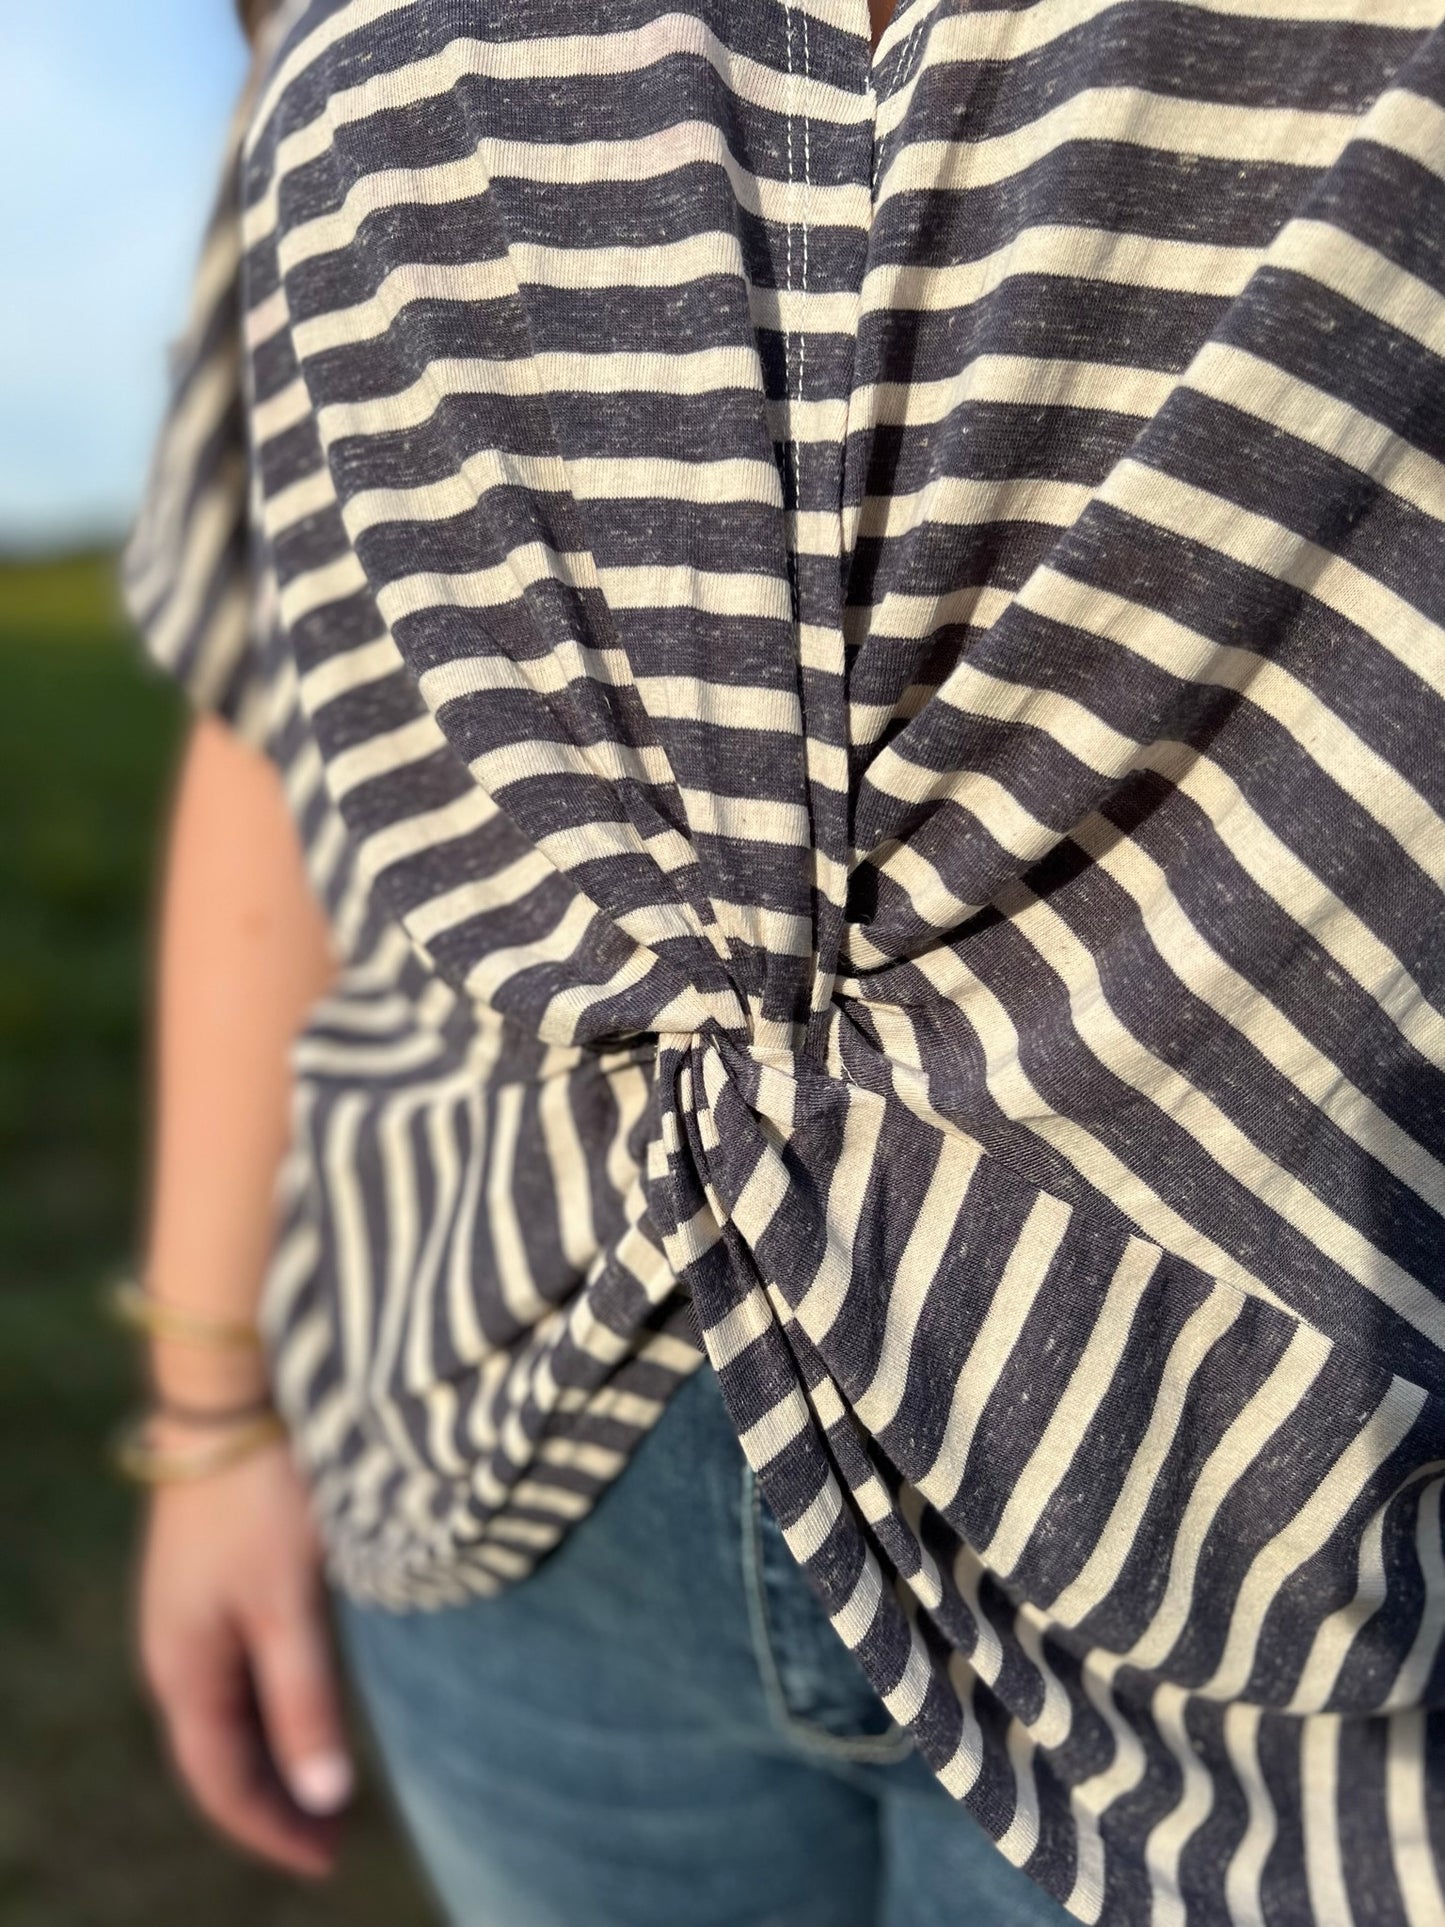 Afraid Knot Striped Top